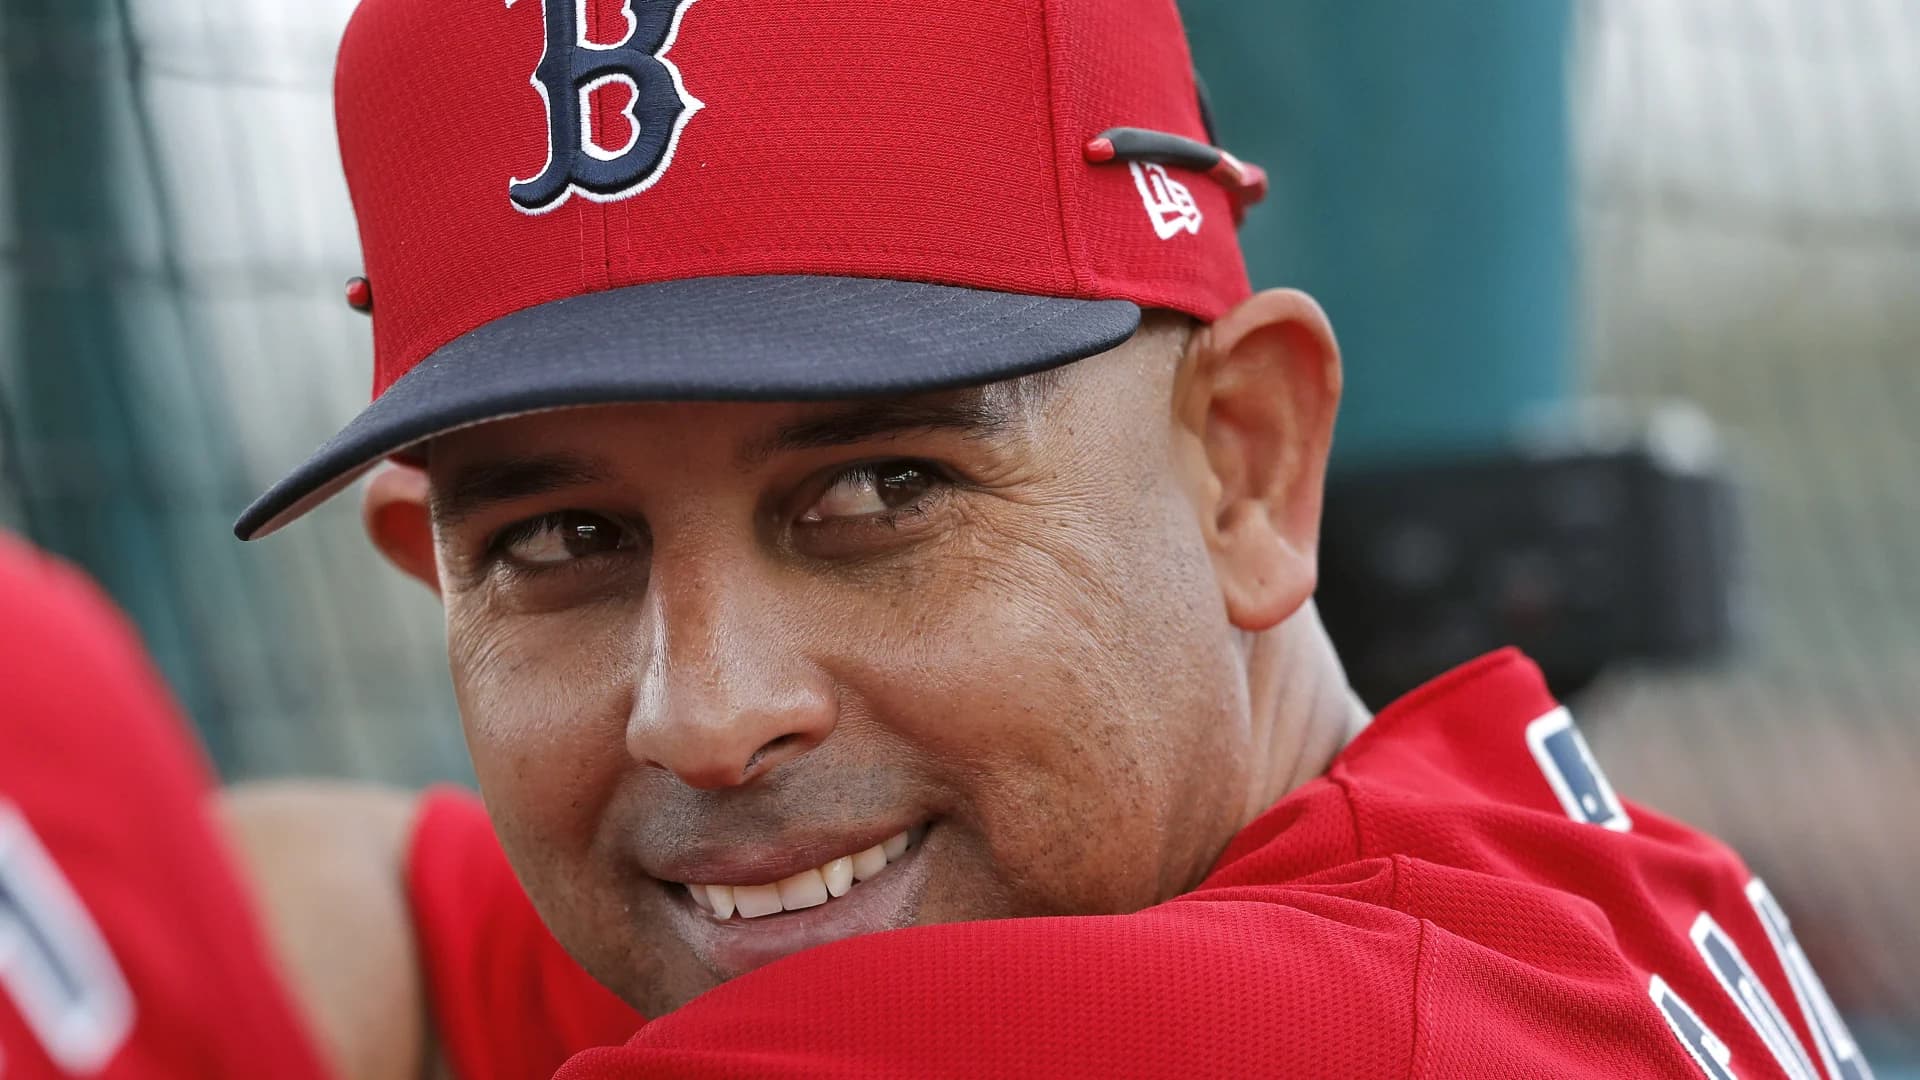 Red Sox rehire Cora following suspension for cheating scandal